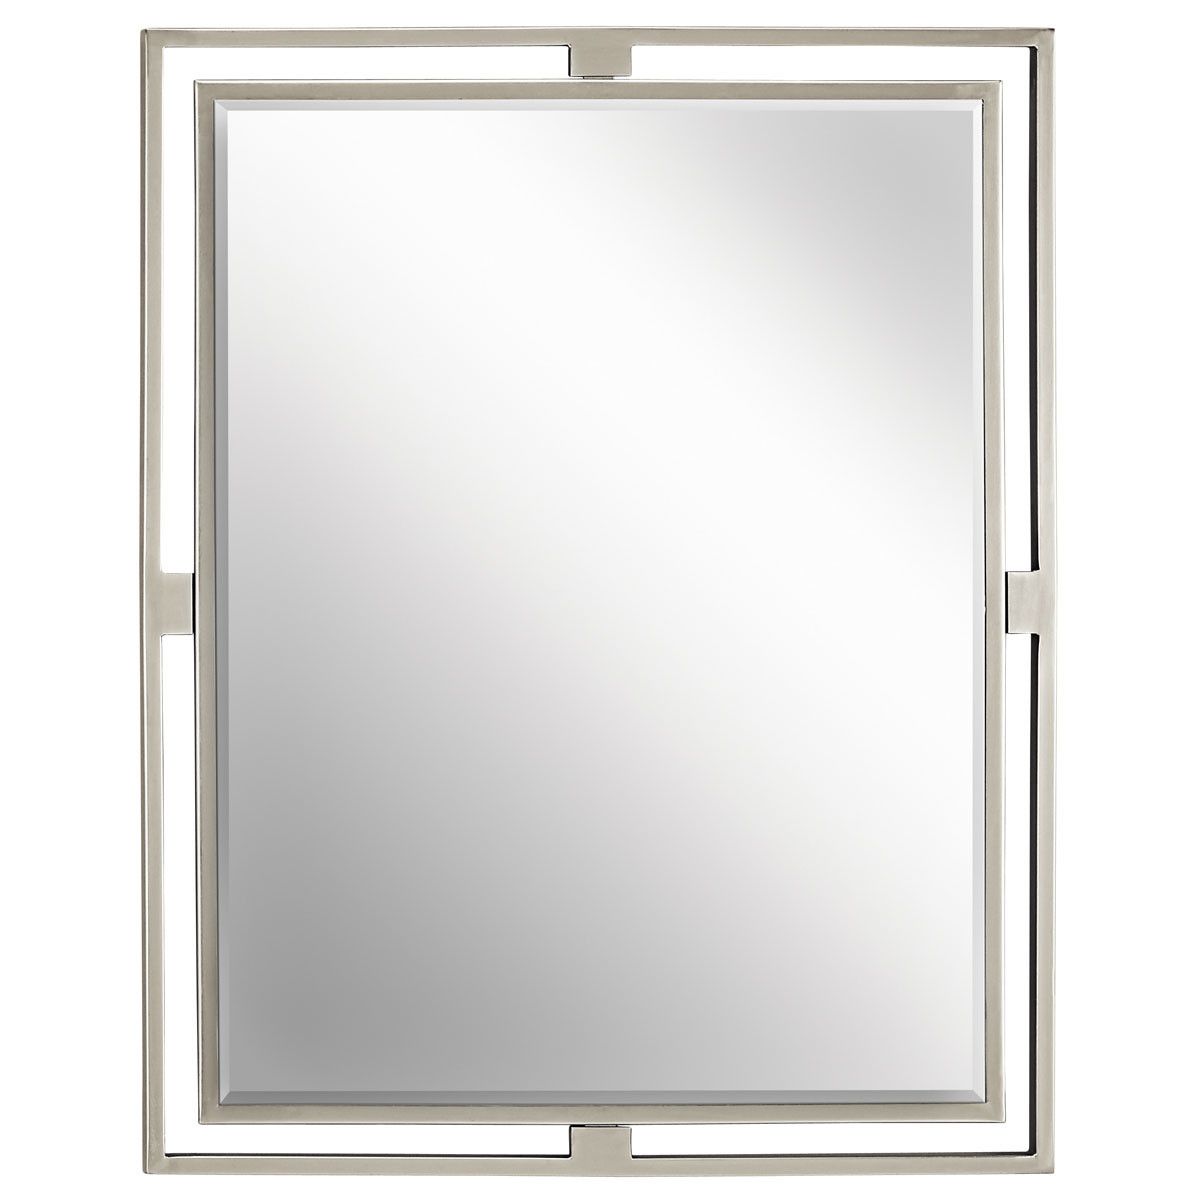 Kichler 41071 Brushed Nickel Hendrik Rectangle Beveled Framed Mirror In Oxidized Nickel Wall Mirrors (View 2 of 15)